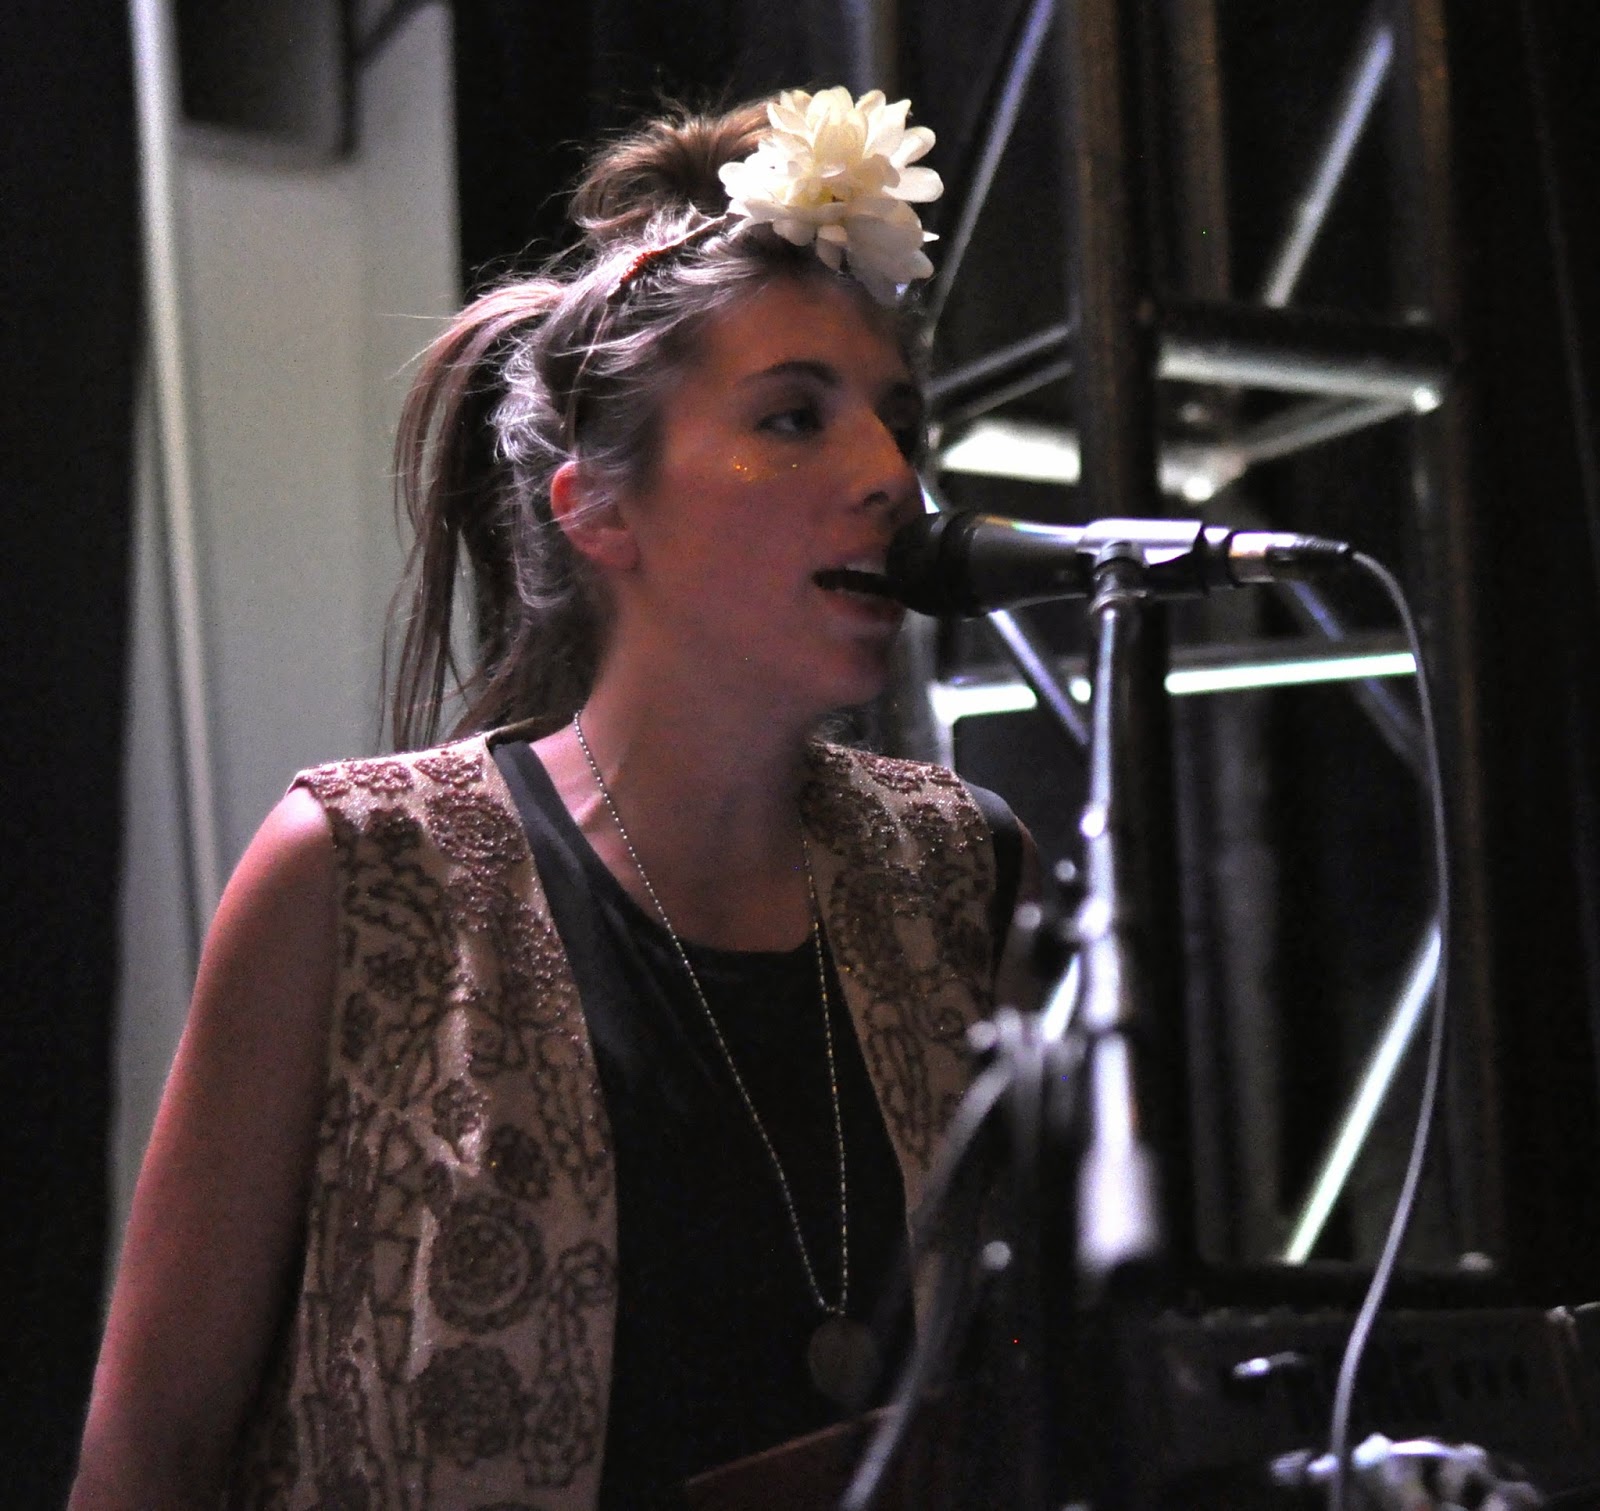 The Edward Day Gallery on Queen Street hosted Doomsquad at NXNE 2014.